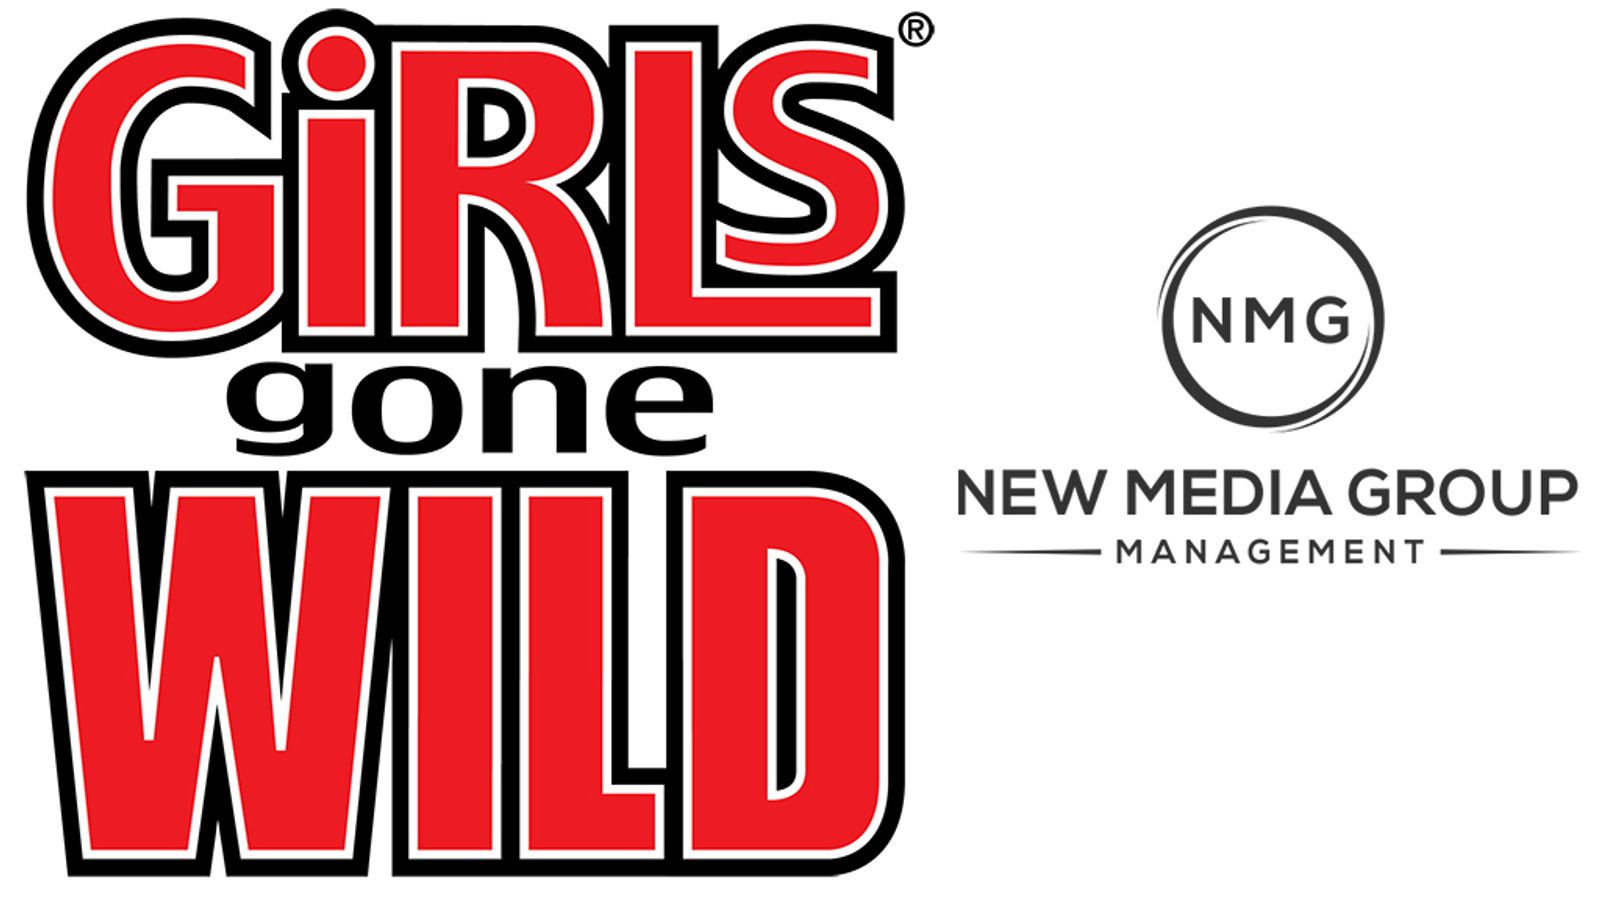 NMG Management To Exclusively Rep 'Girls Gone Wild' Brand